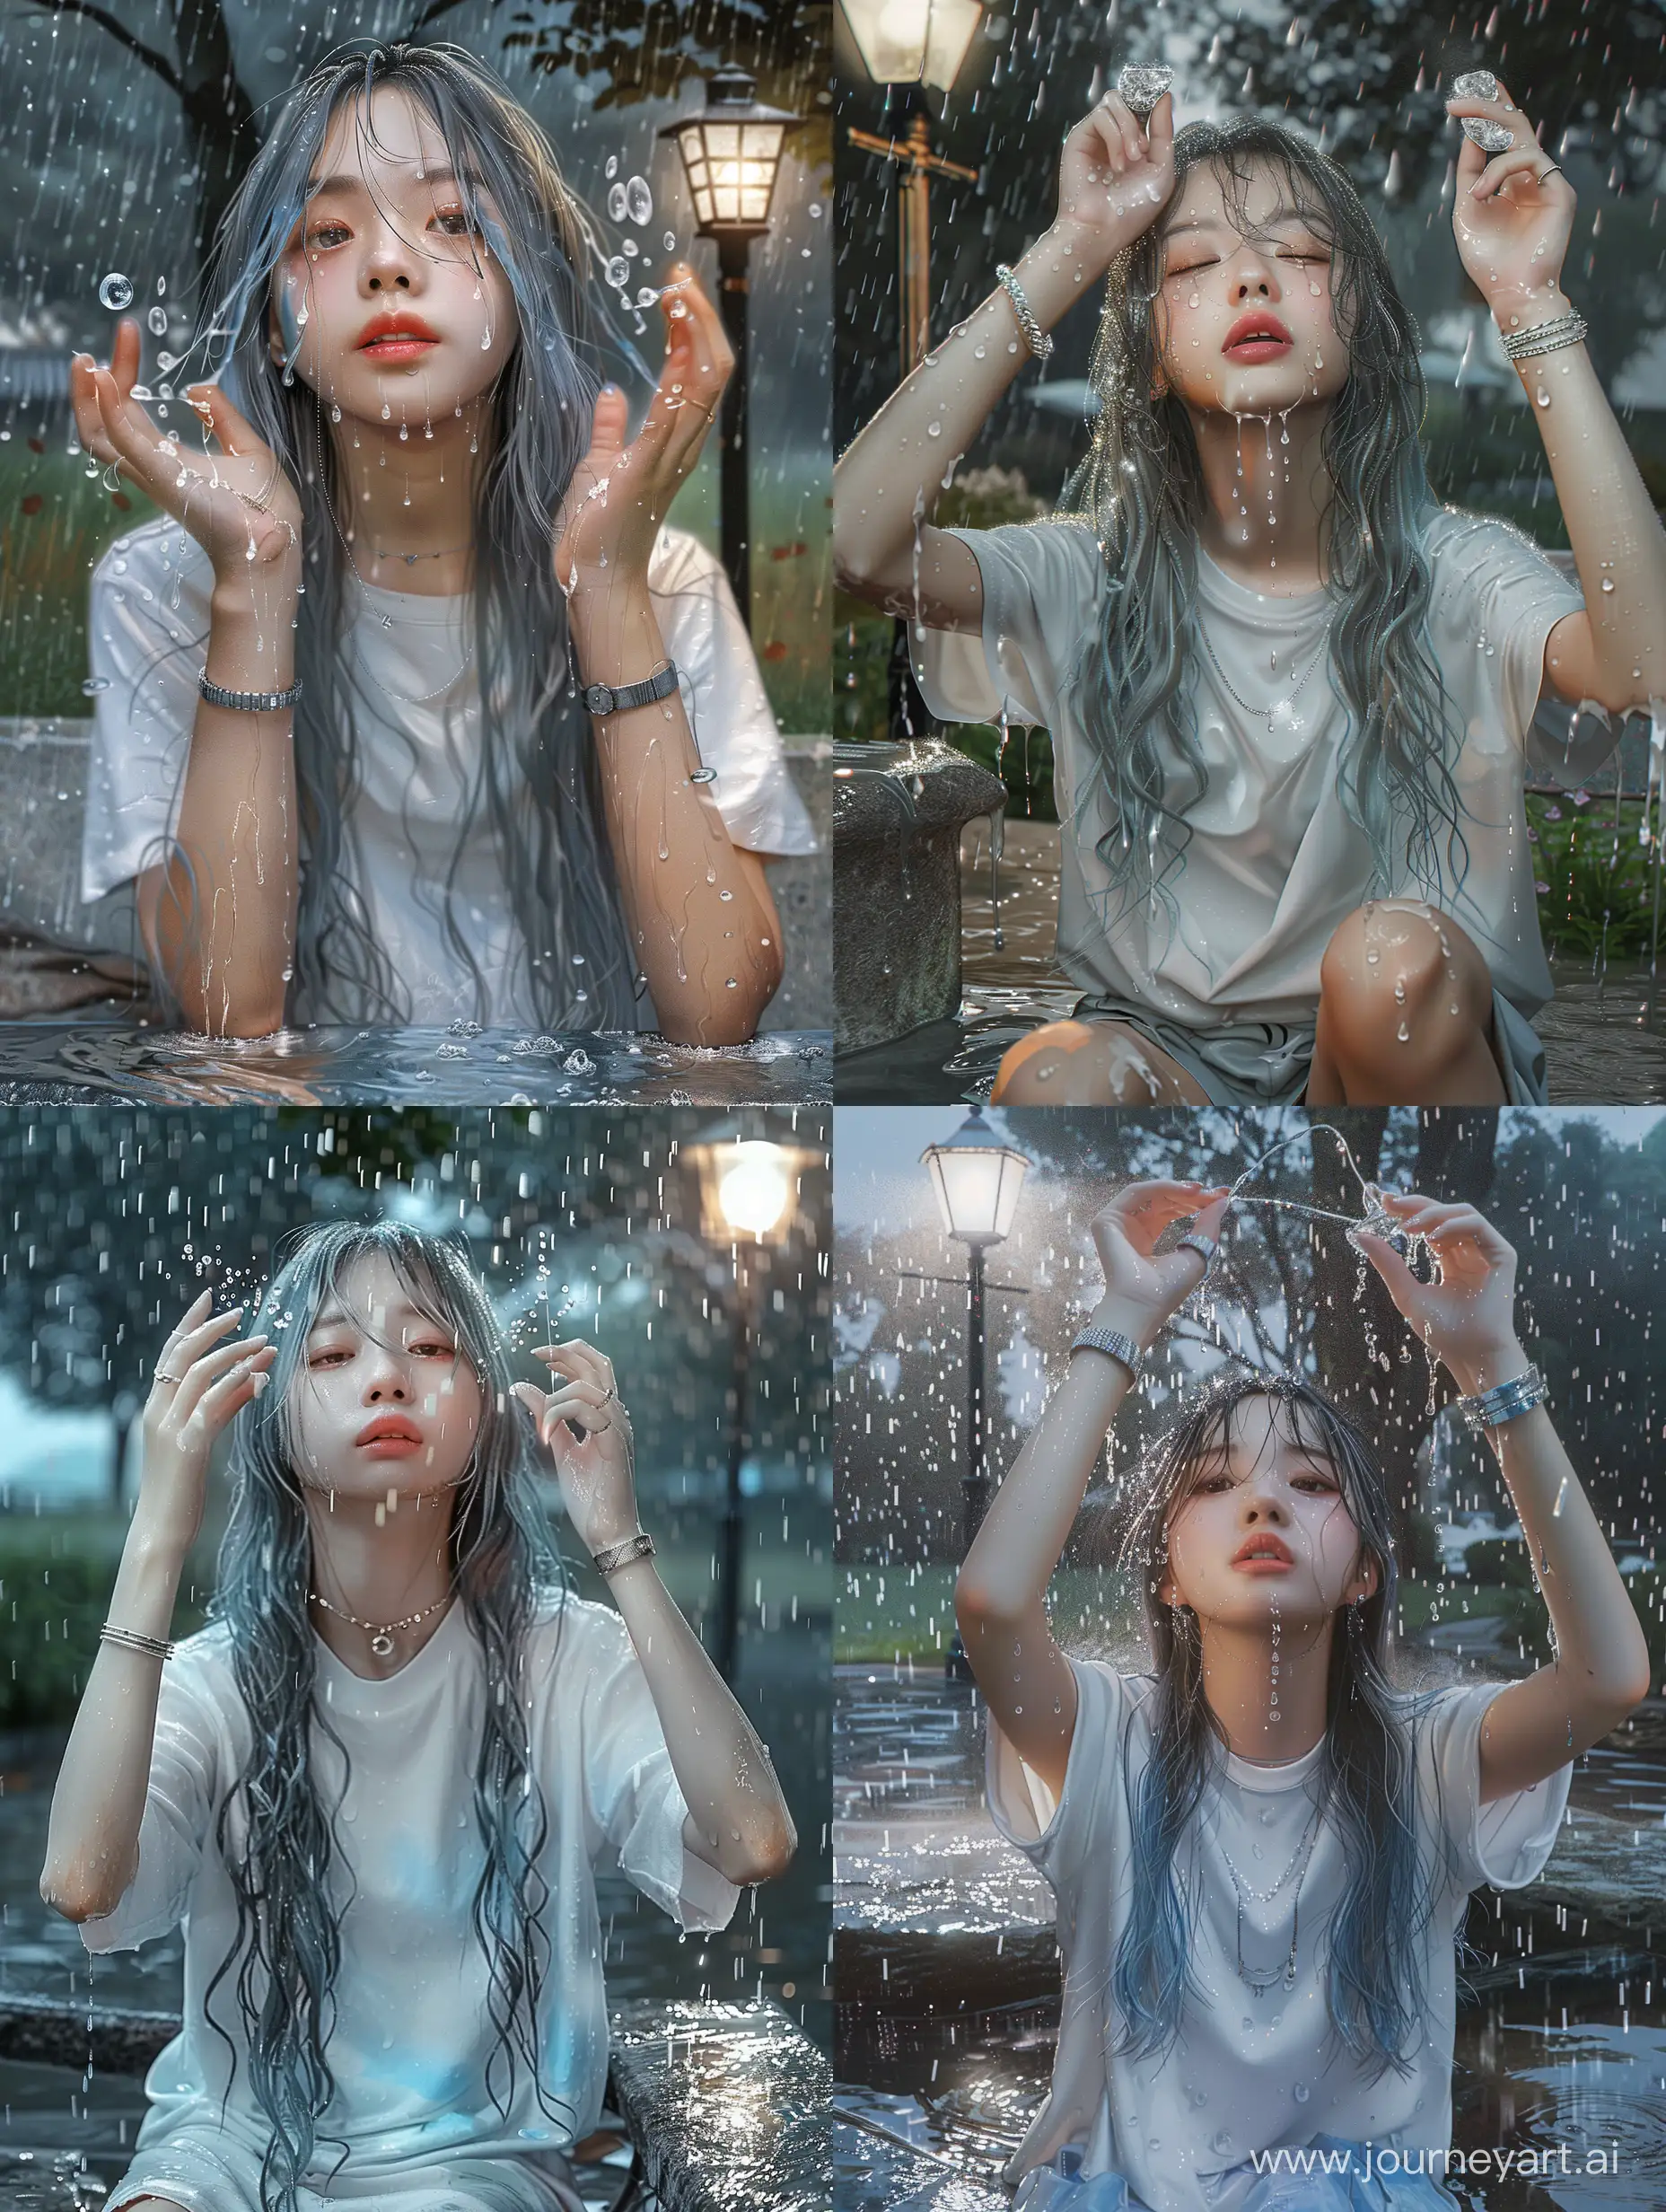 Realistic image of an Asian girl, 20 years old, she is holding up her slender fingers to catch raindrops, silver bracelet, wet round neck white t-shirt, she shows perfect emotions , cheeks rosy, lips glossy, face slightly raised, face receiving the light, many raindrops on her face, face wet from the rain, long gray hair mixed with light blue, she sat on a stone bench in park, strong light lamppost next to the bench, rainwater flowing in streams under her feet